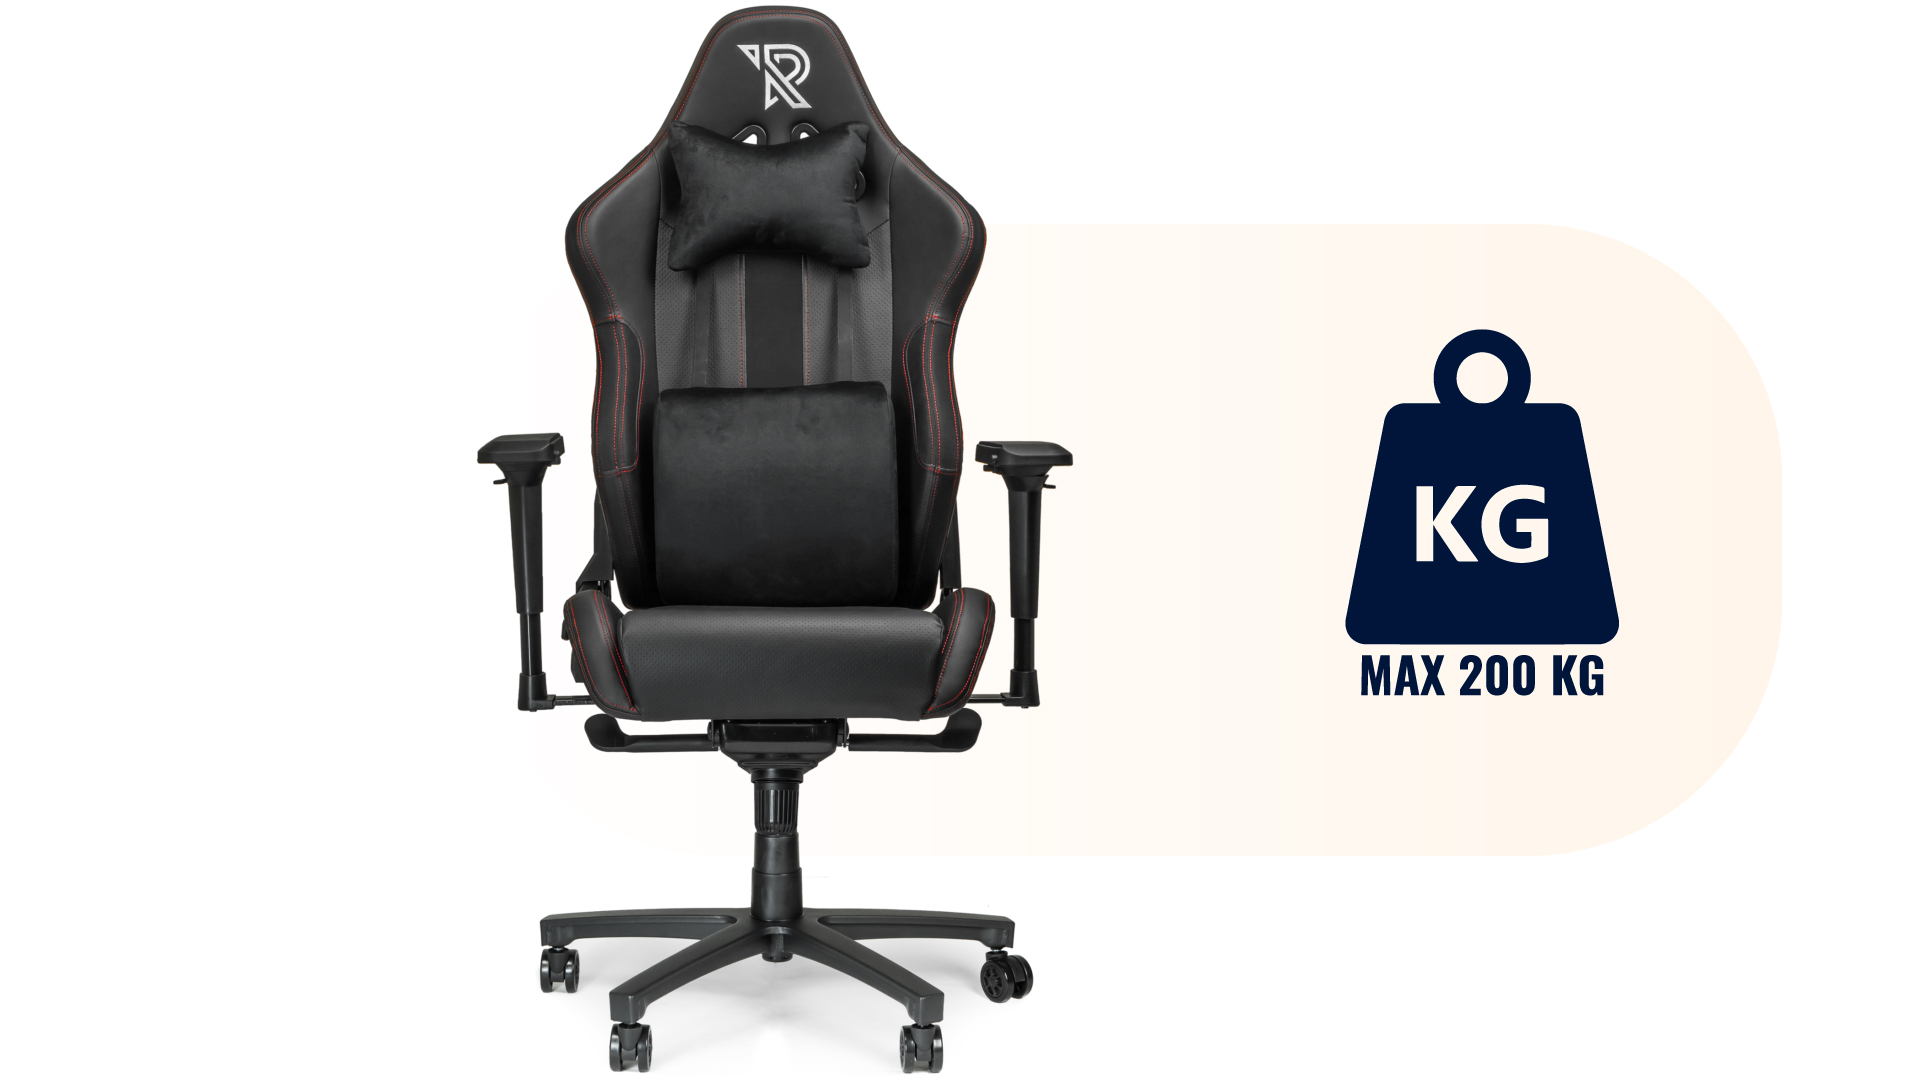 Chaise gamer XL et grande taille